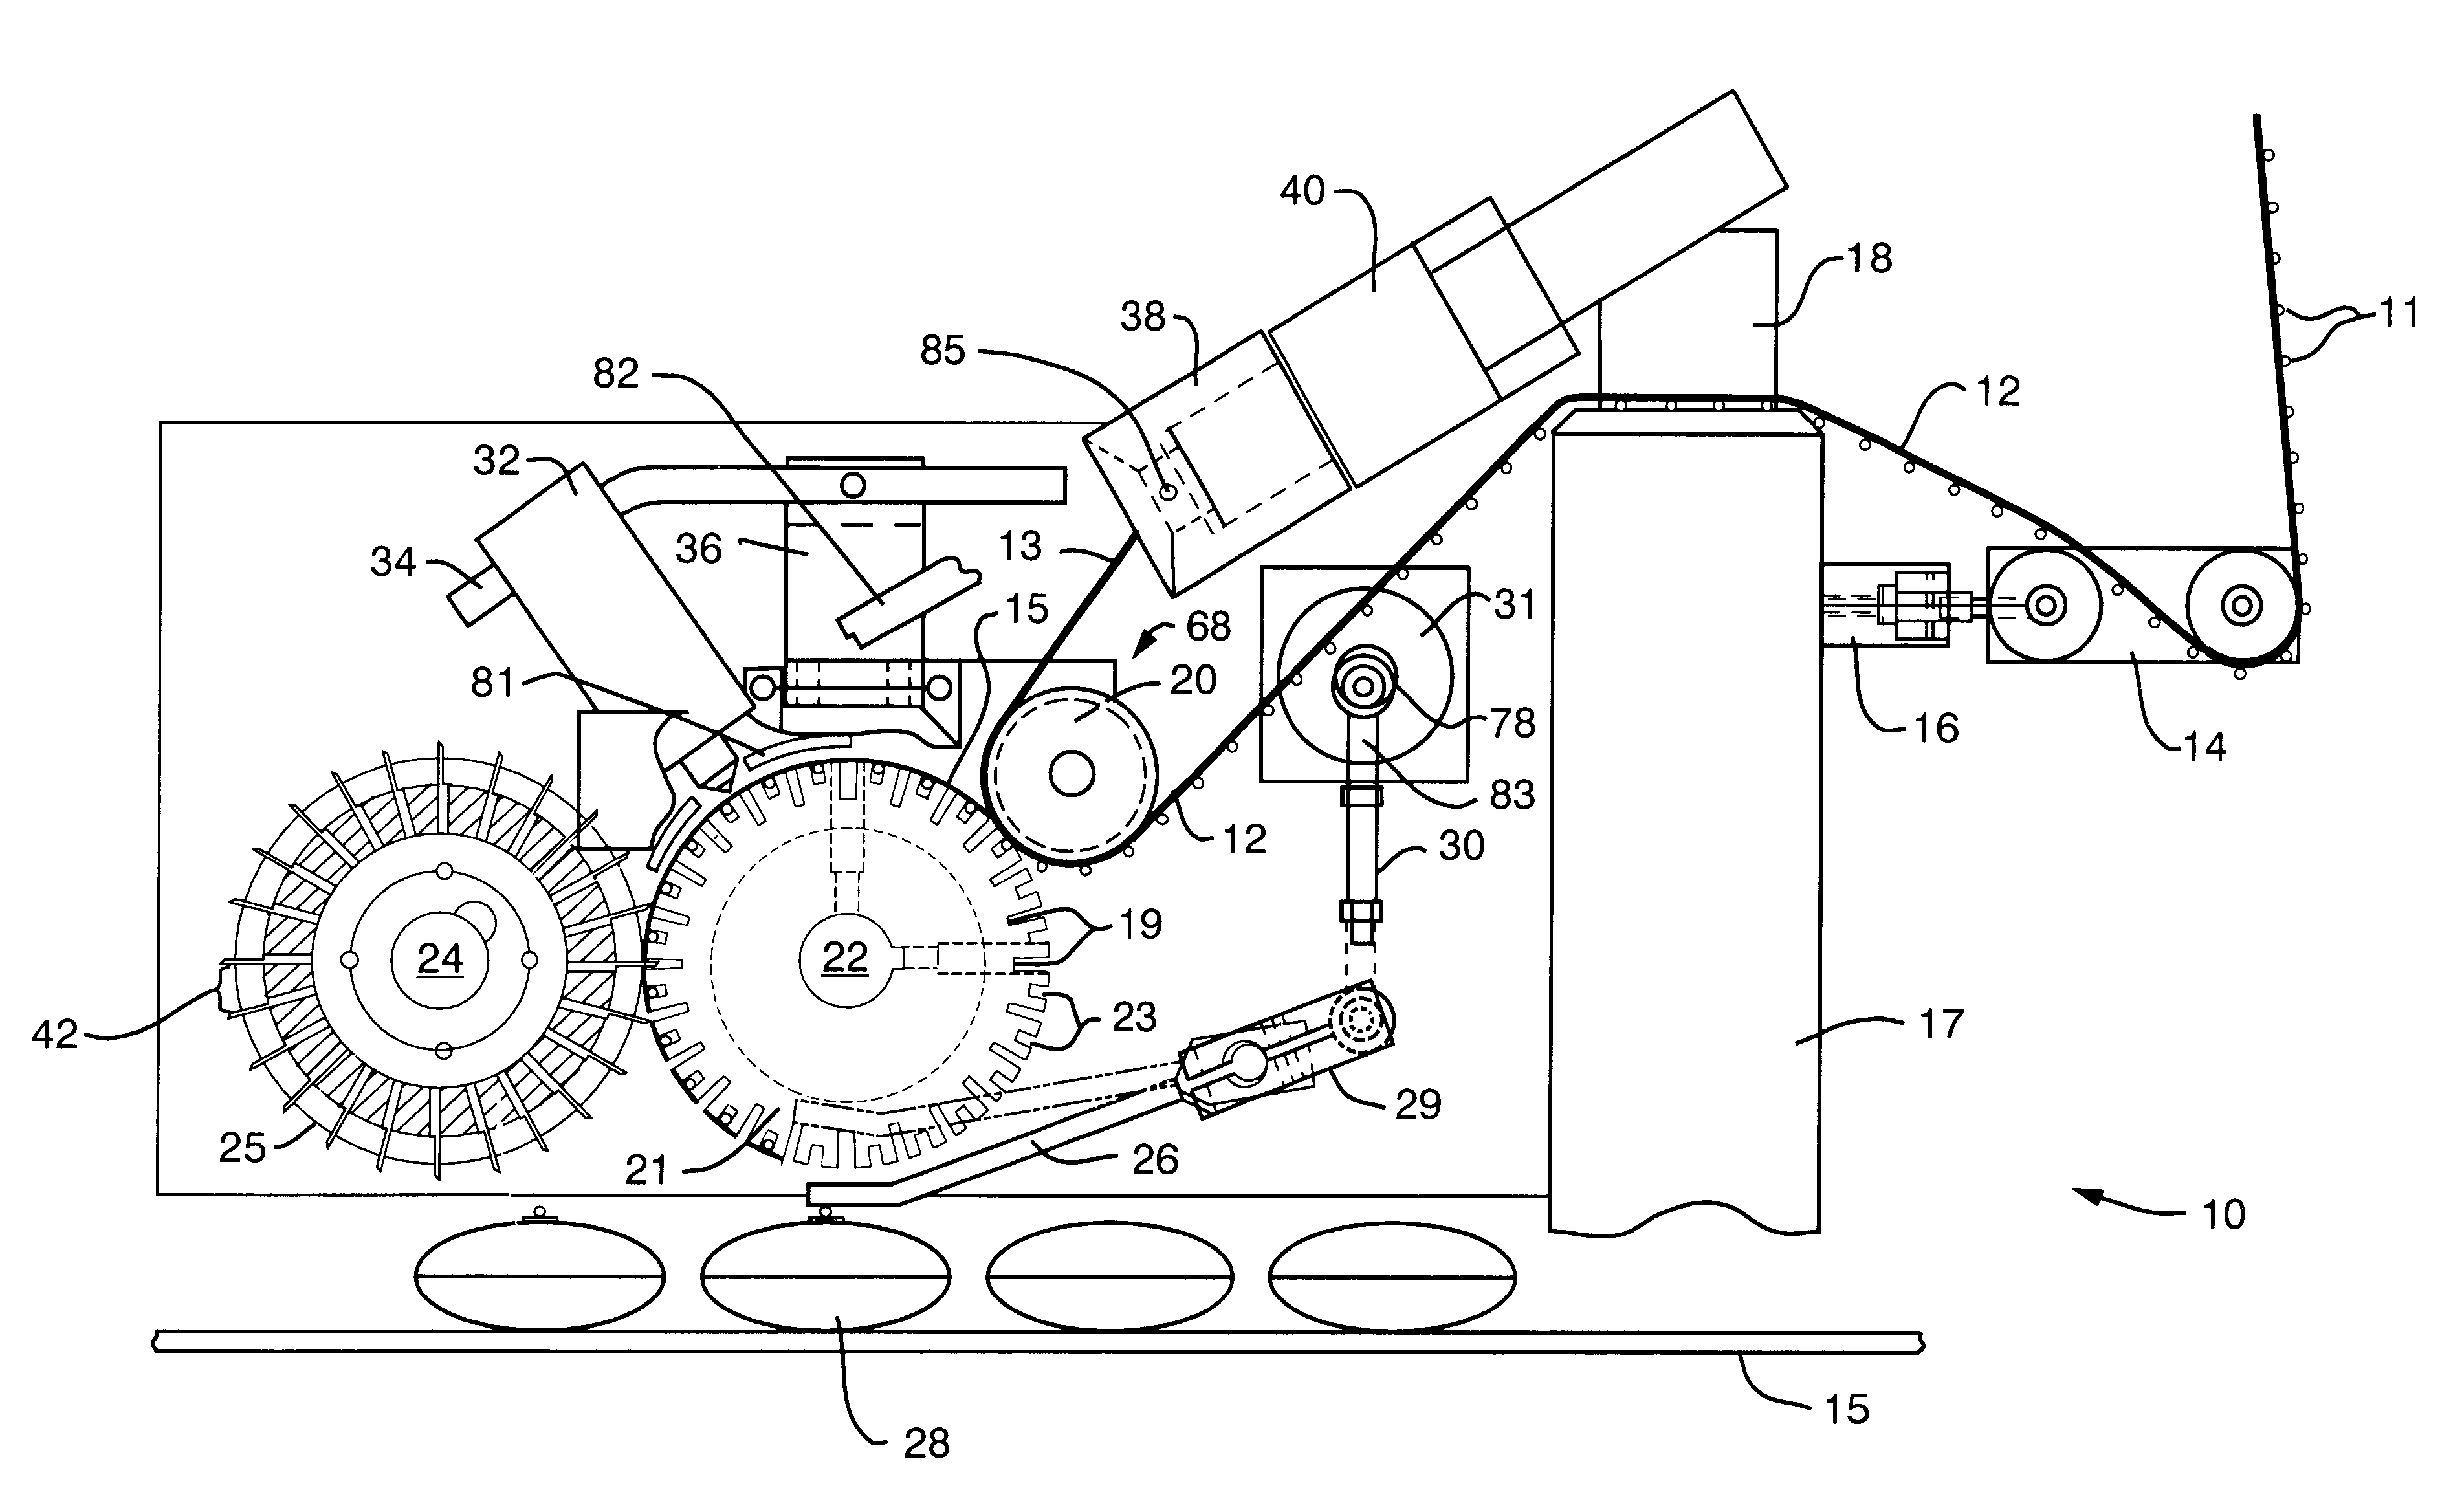 Apparatus and method for attaching straws to containers